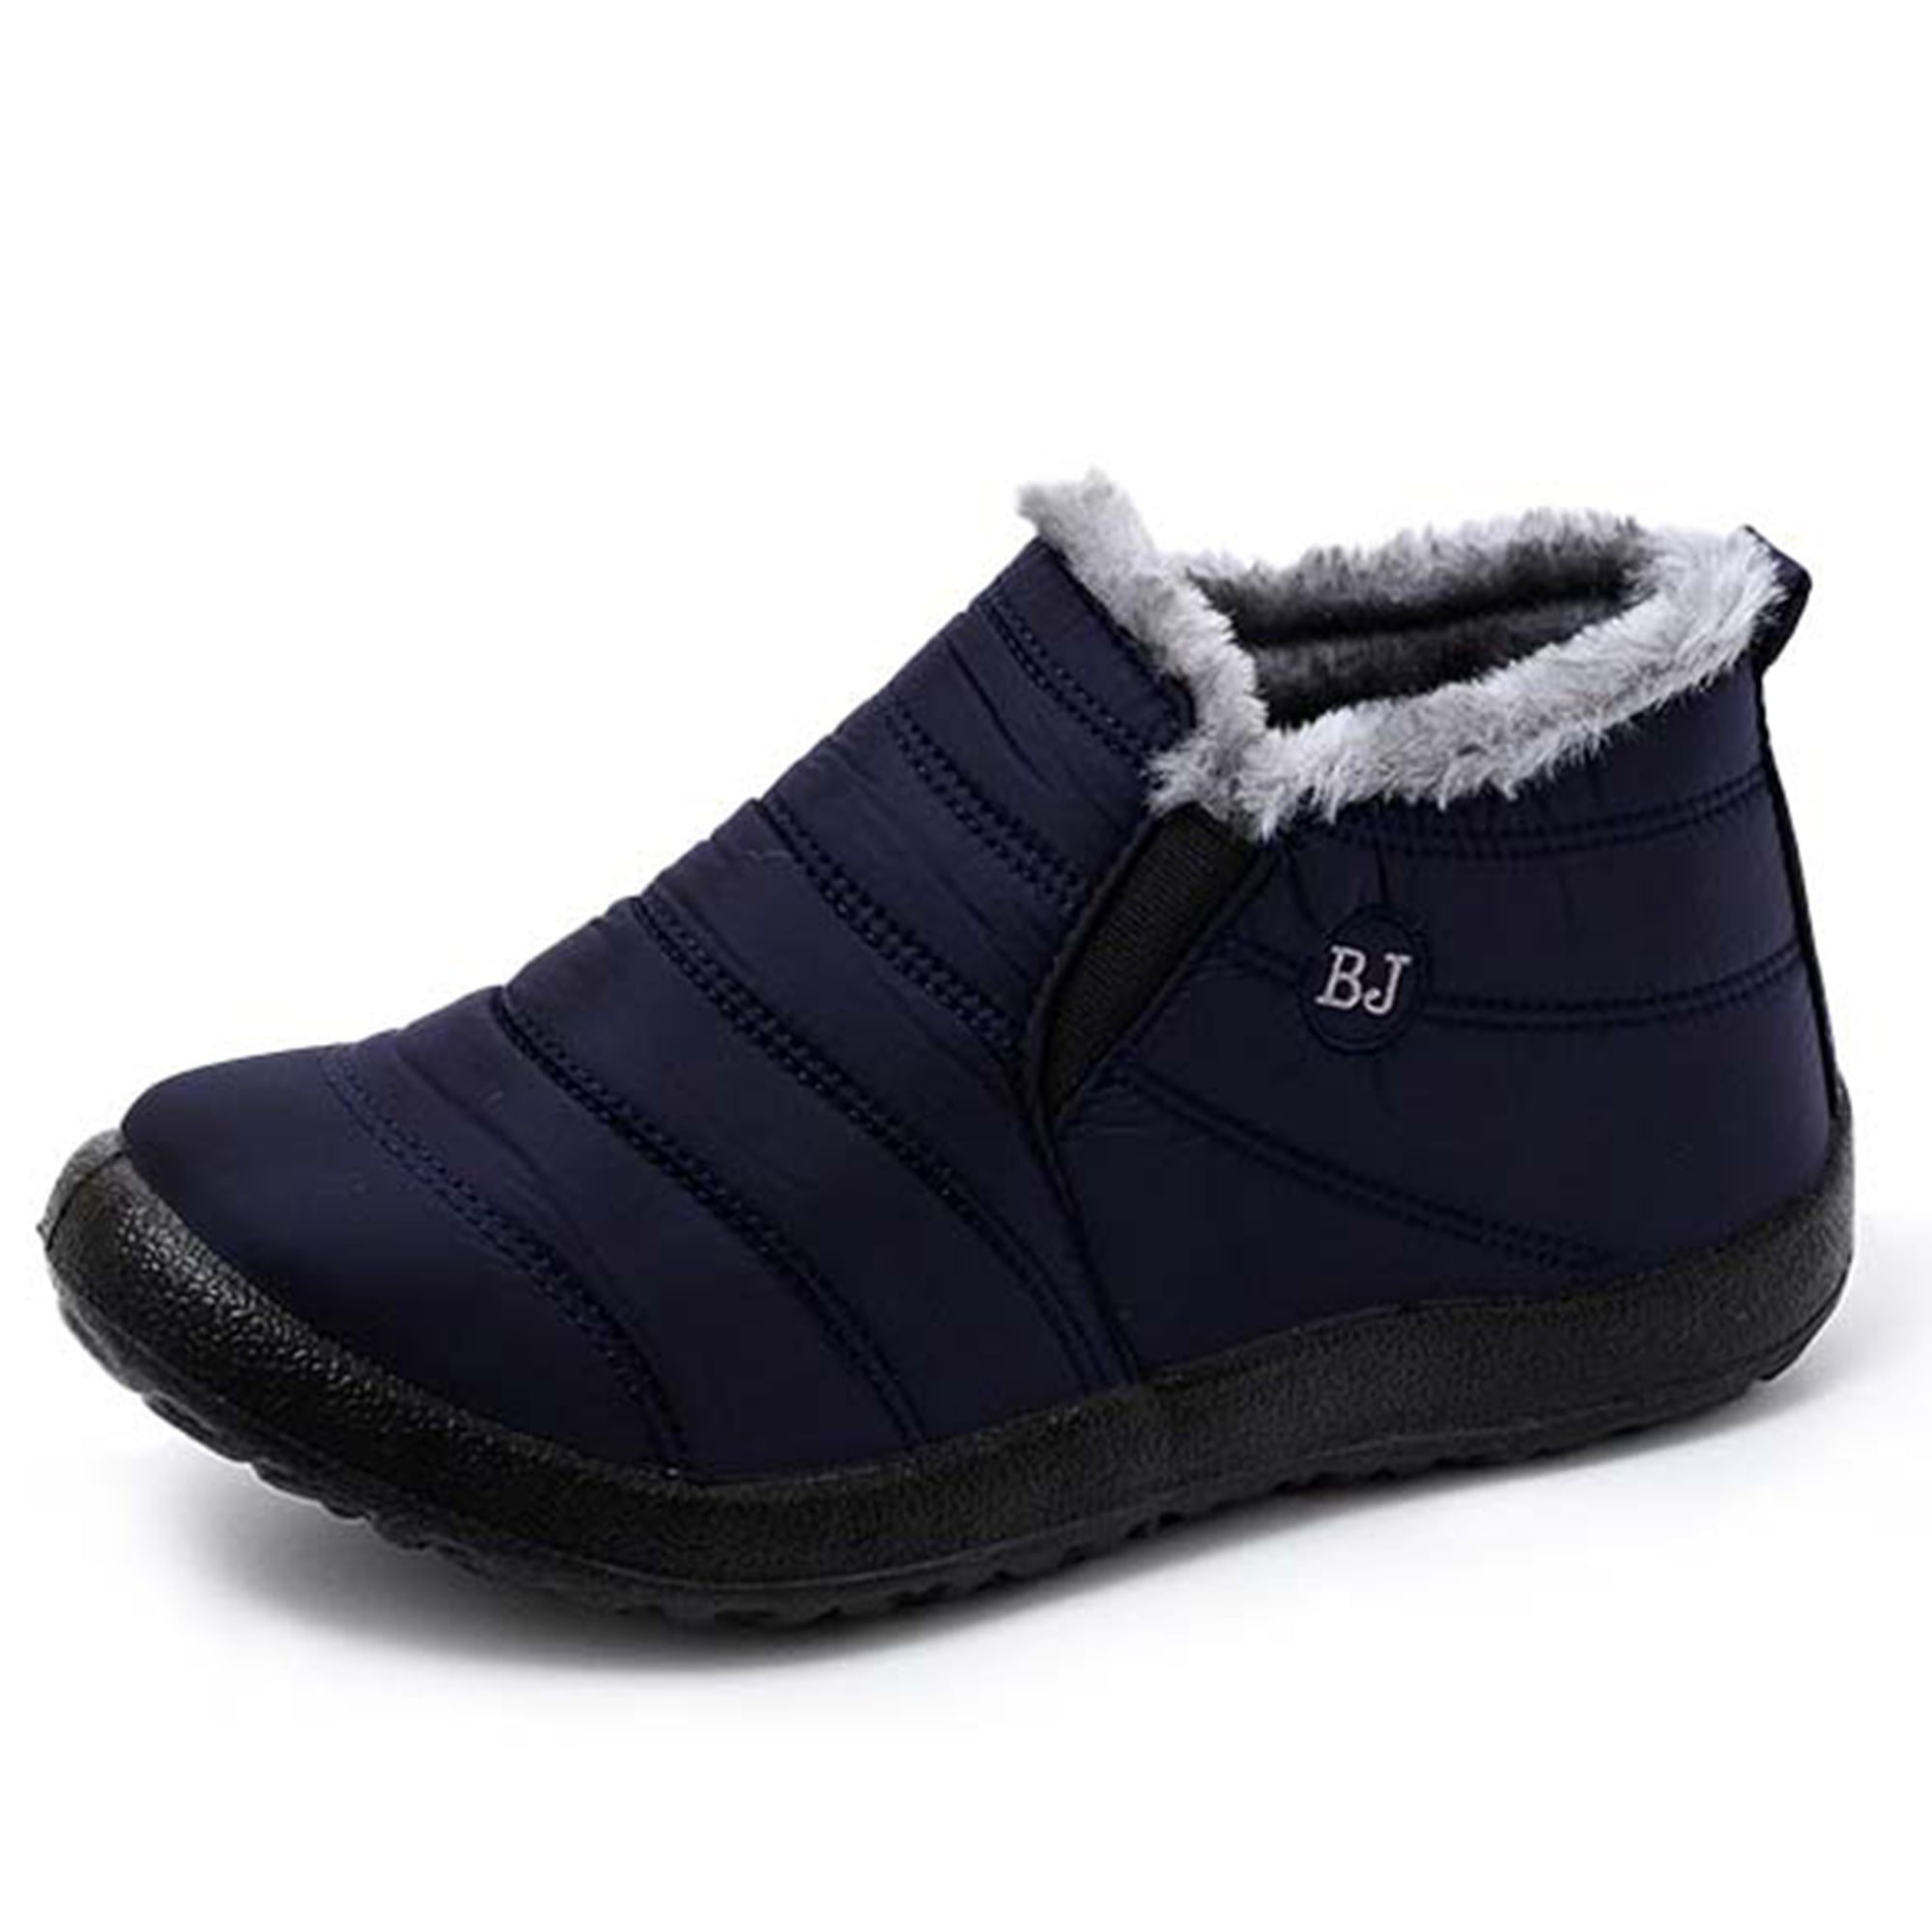 SHIBEVER Womens Snow Boots Warm Faux Fur Lined Ankle Booties Winter ...